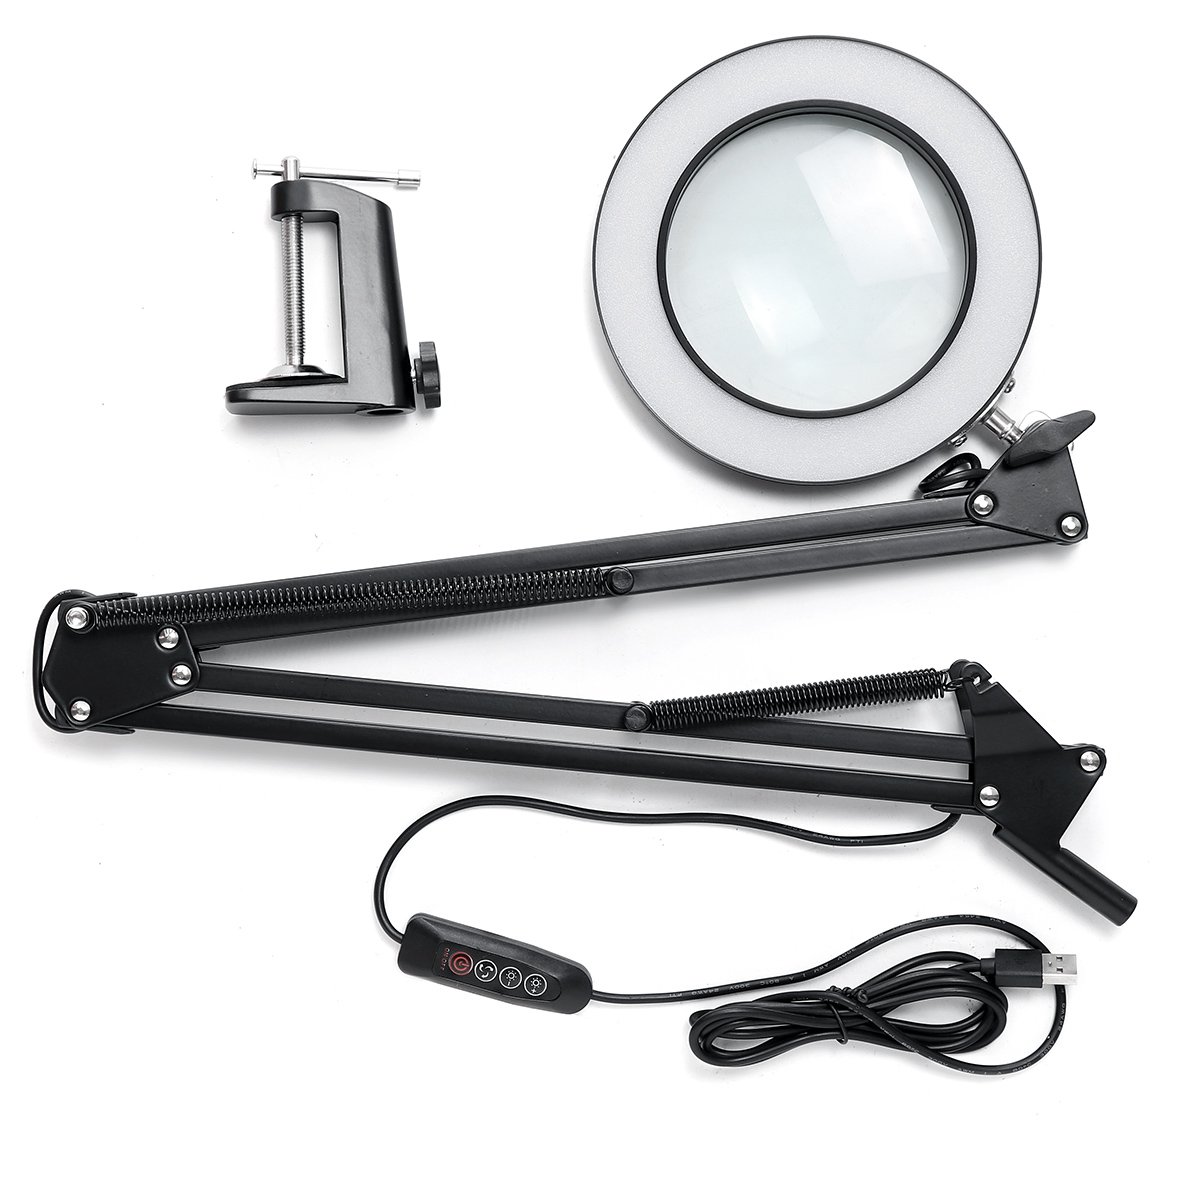 5X-Magnifying-Lamp-Clamp-Mount-LED-Magnifier-Lamp-Manicure-Tattoo-Beauty-Light-1801341-3